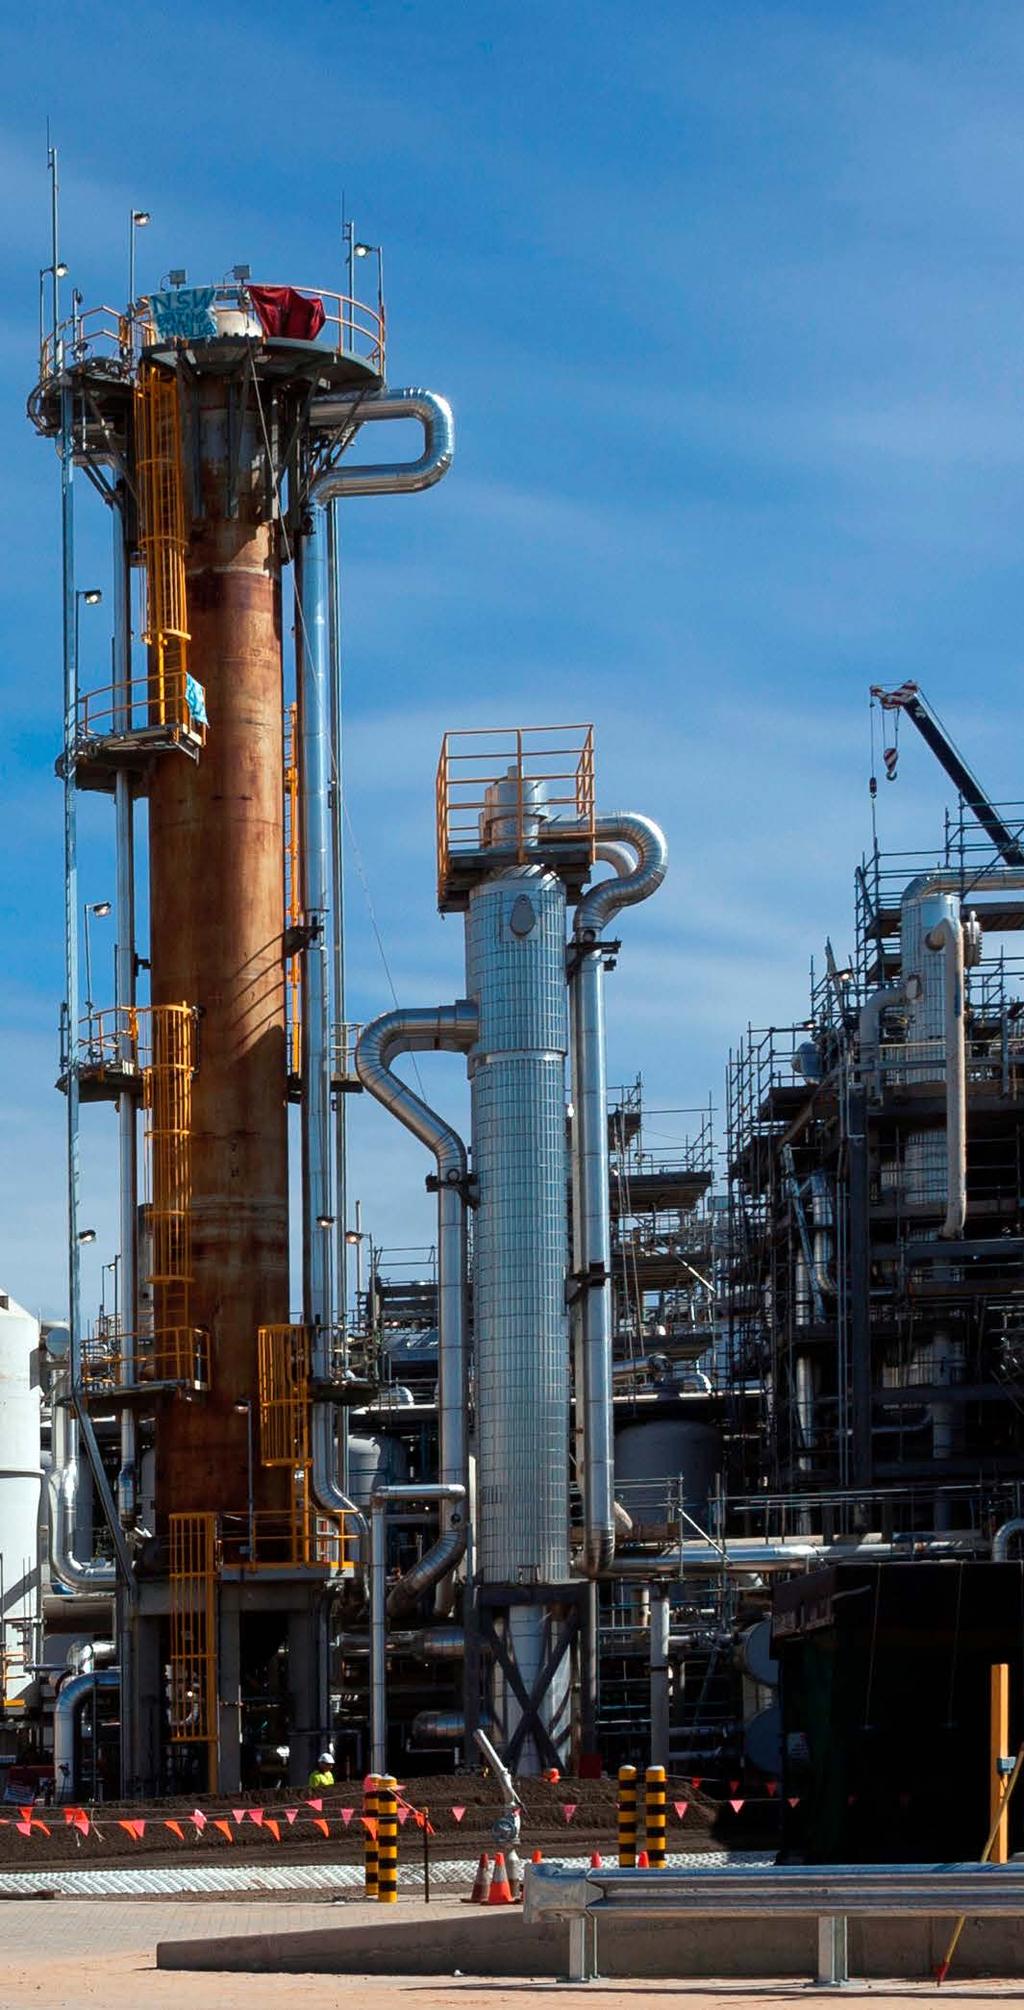 Resources & Equipment Well suited for Pipeline systems, Refineries & Petrochem, process plants projects.